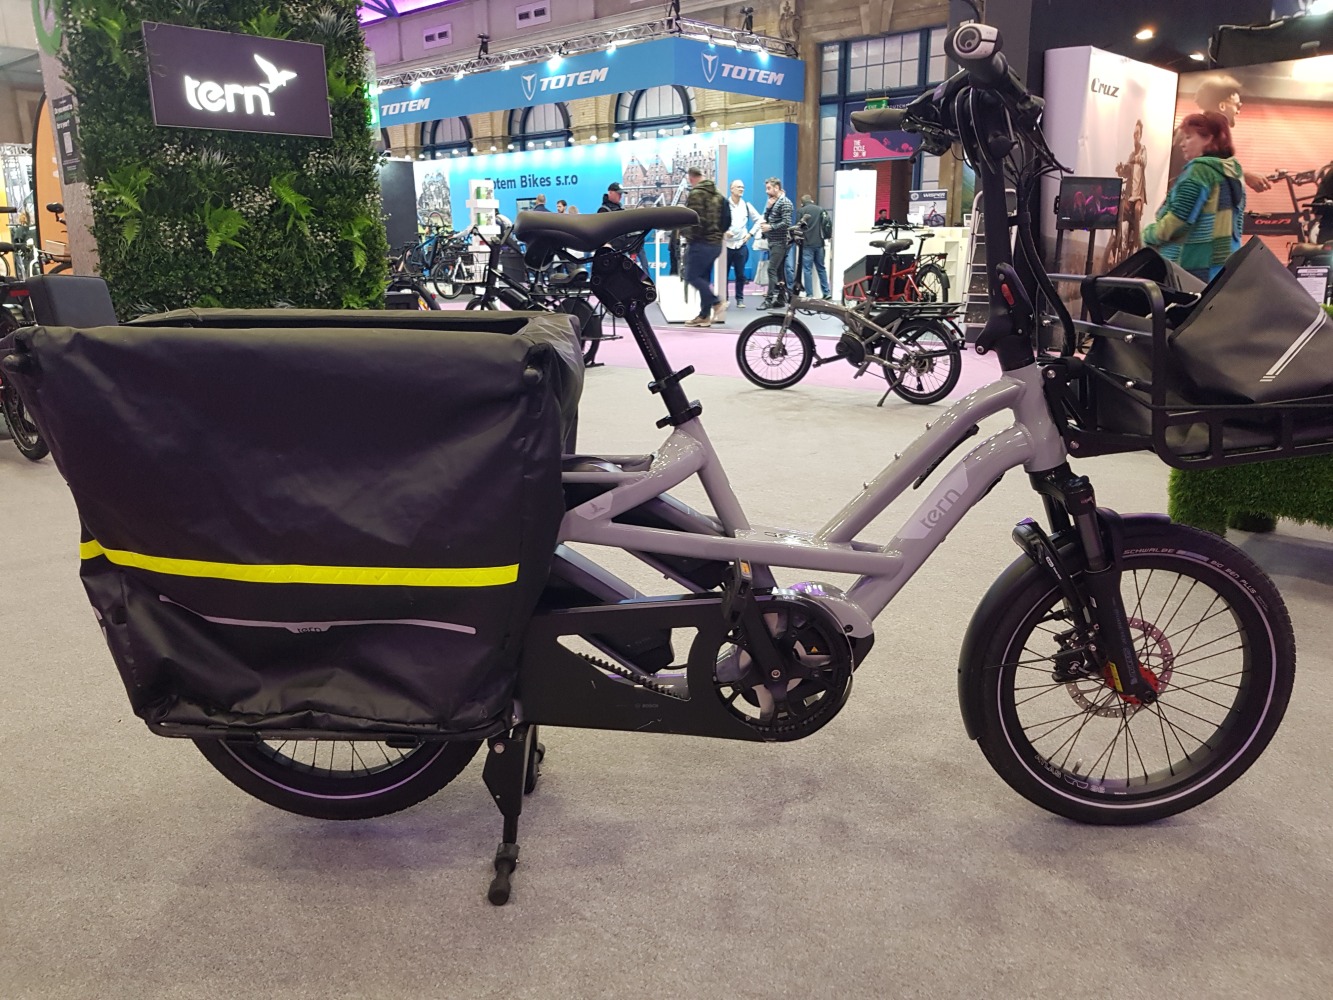 Tern longtail cargo bike at the 2023 Cycle Show